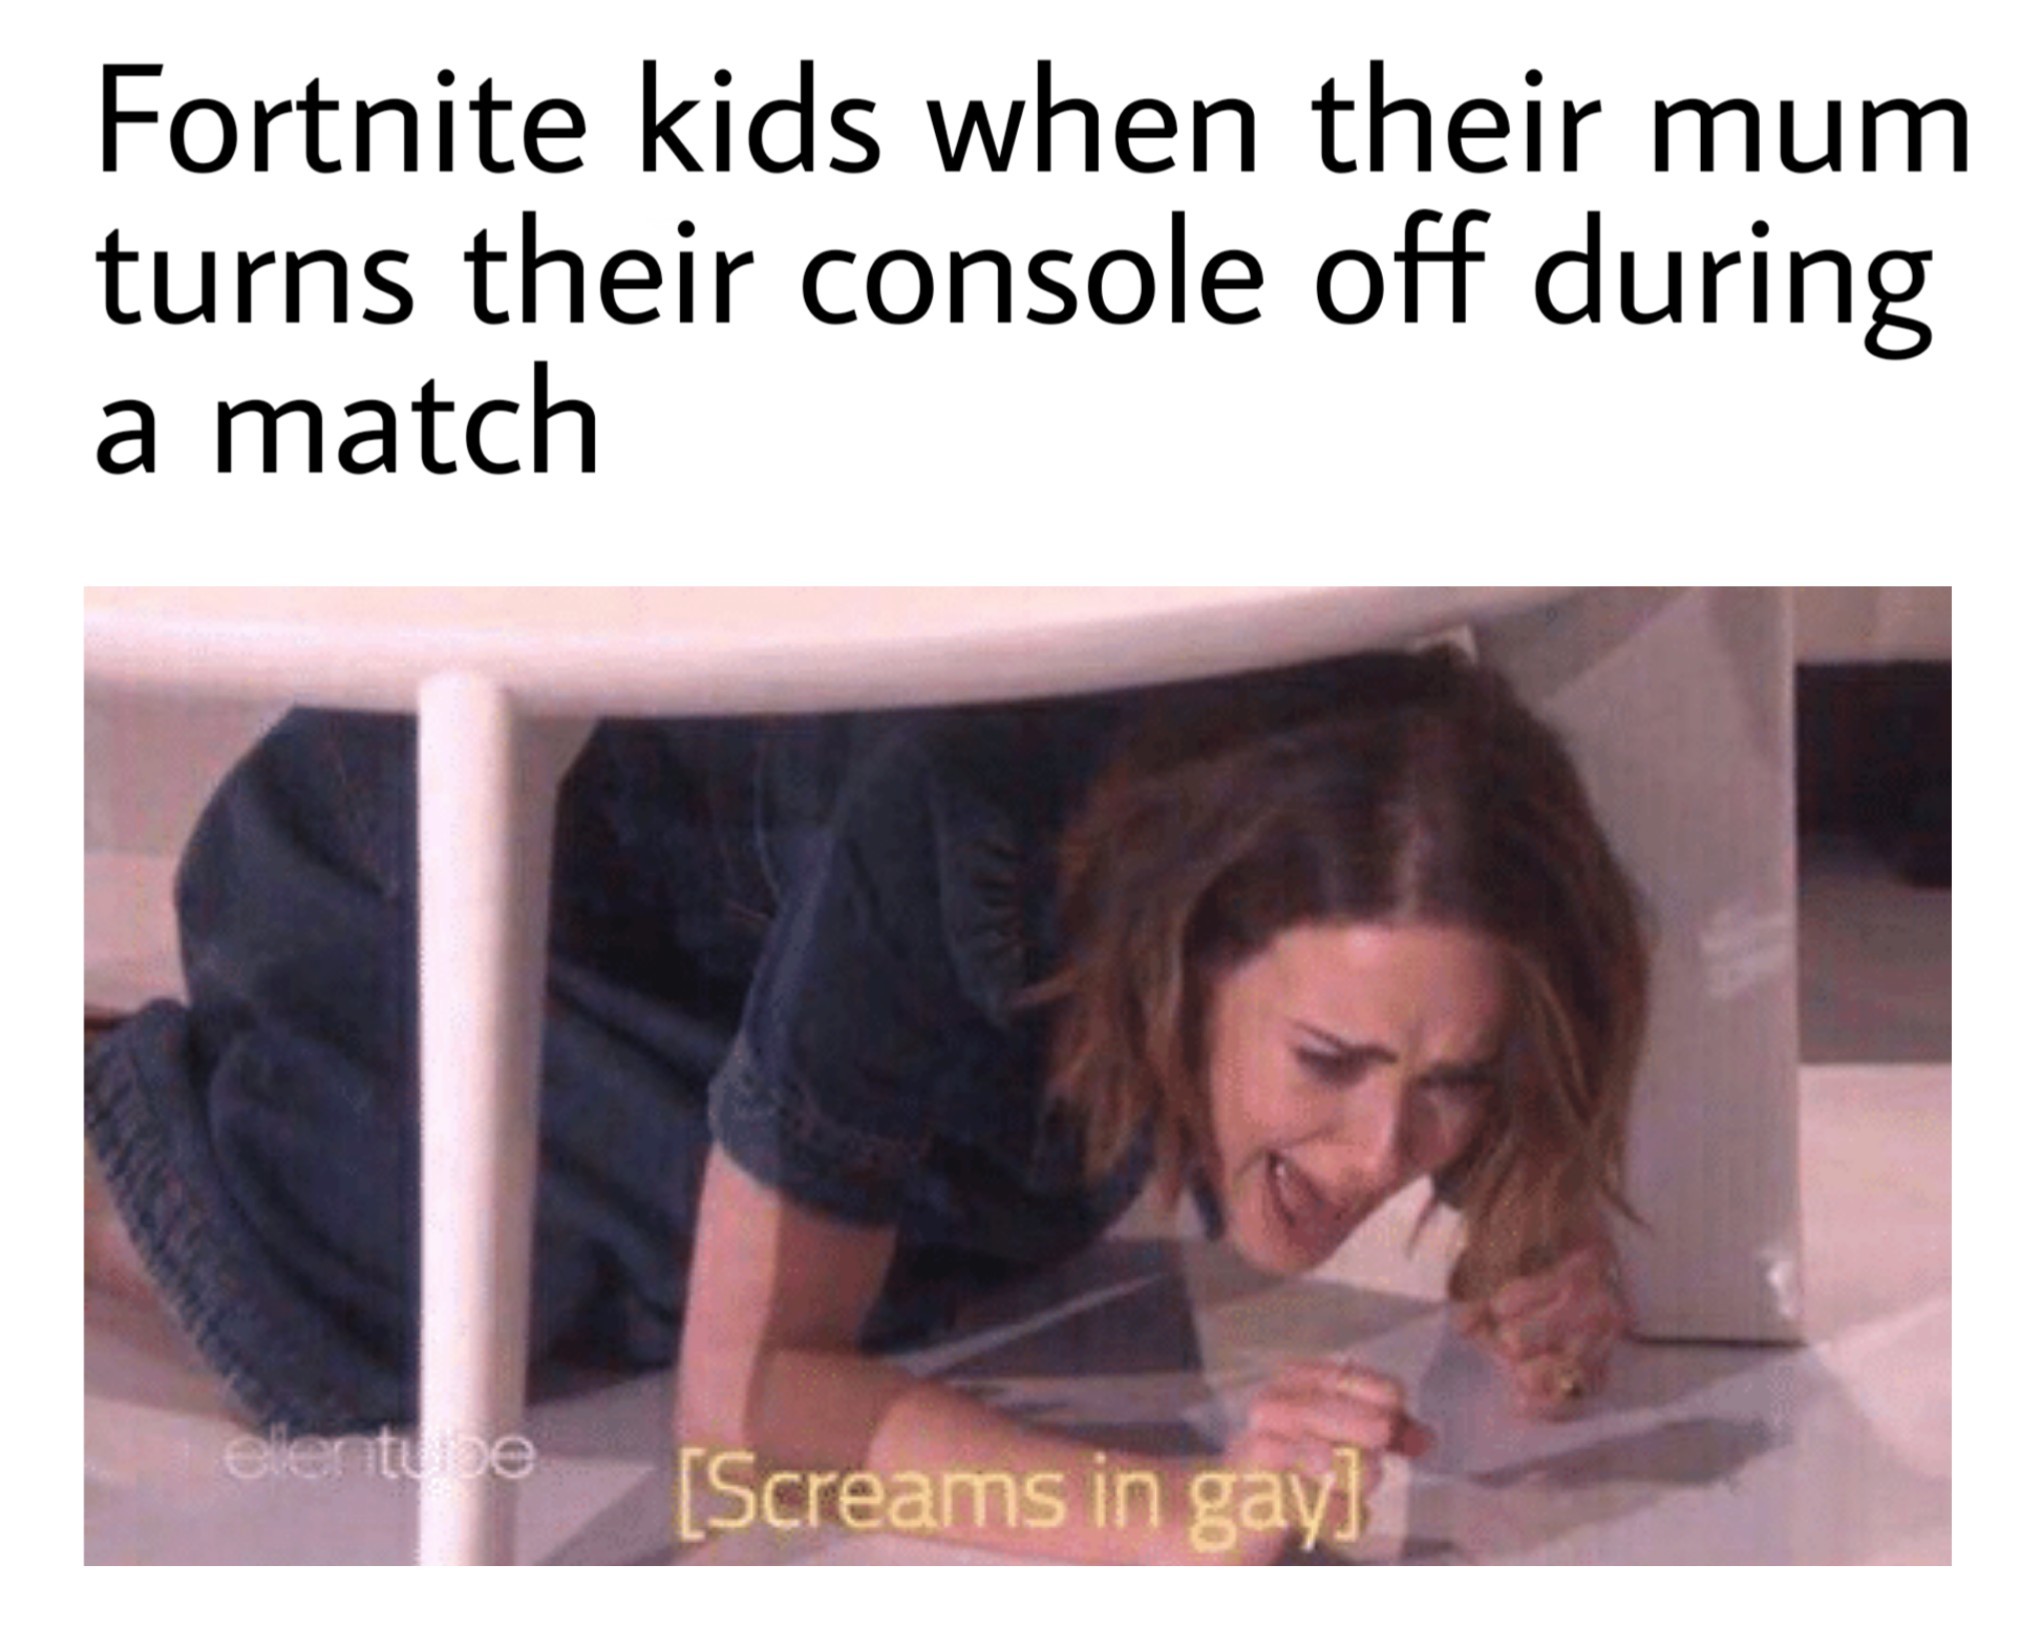 I know Fortnite memes are dead, but I've just had the idea